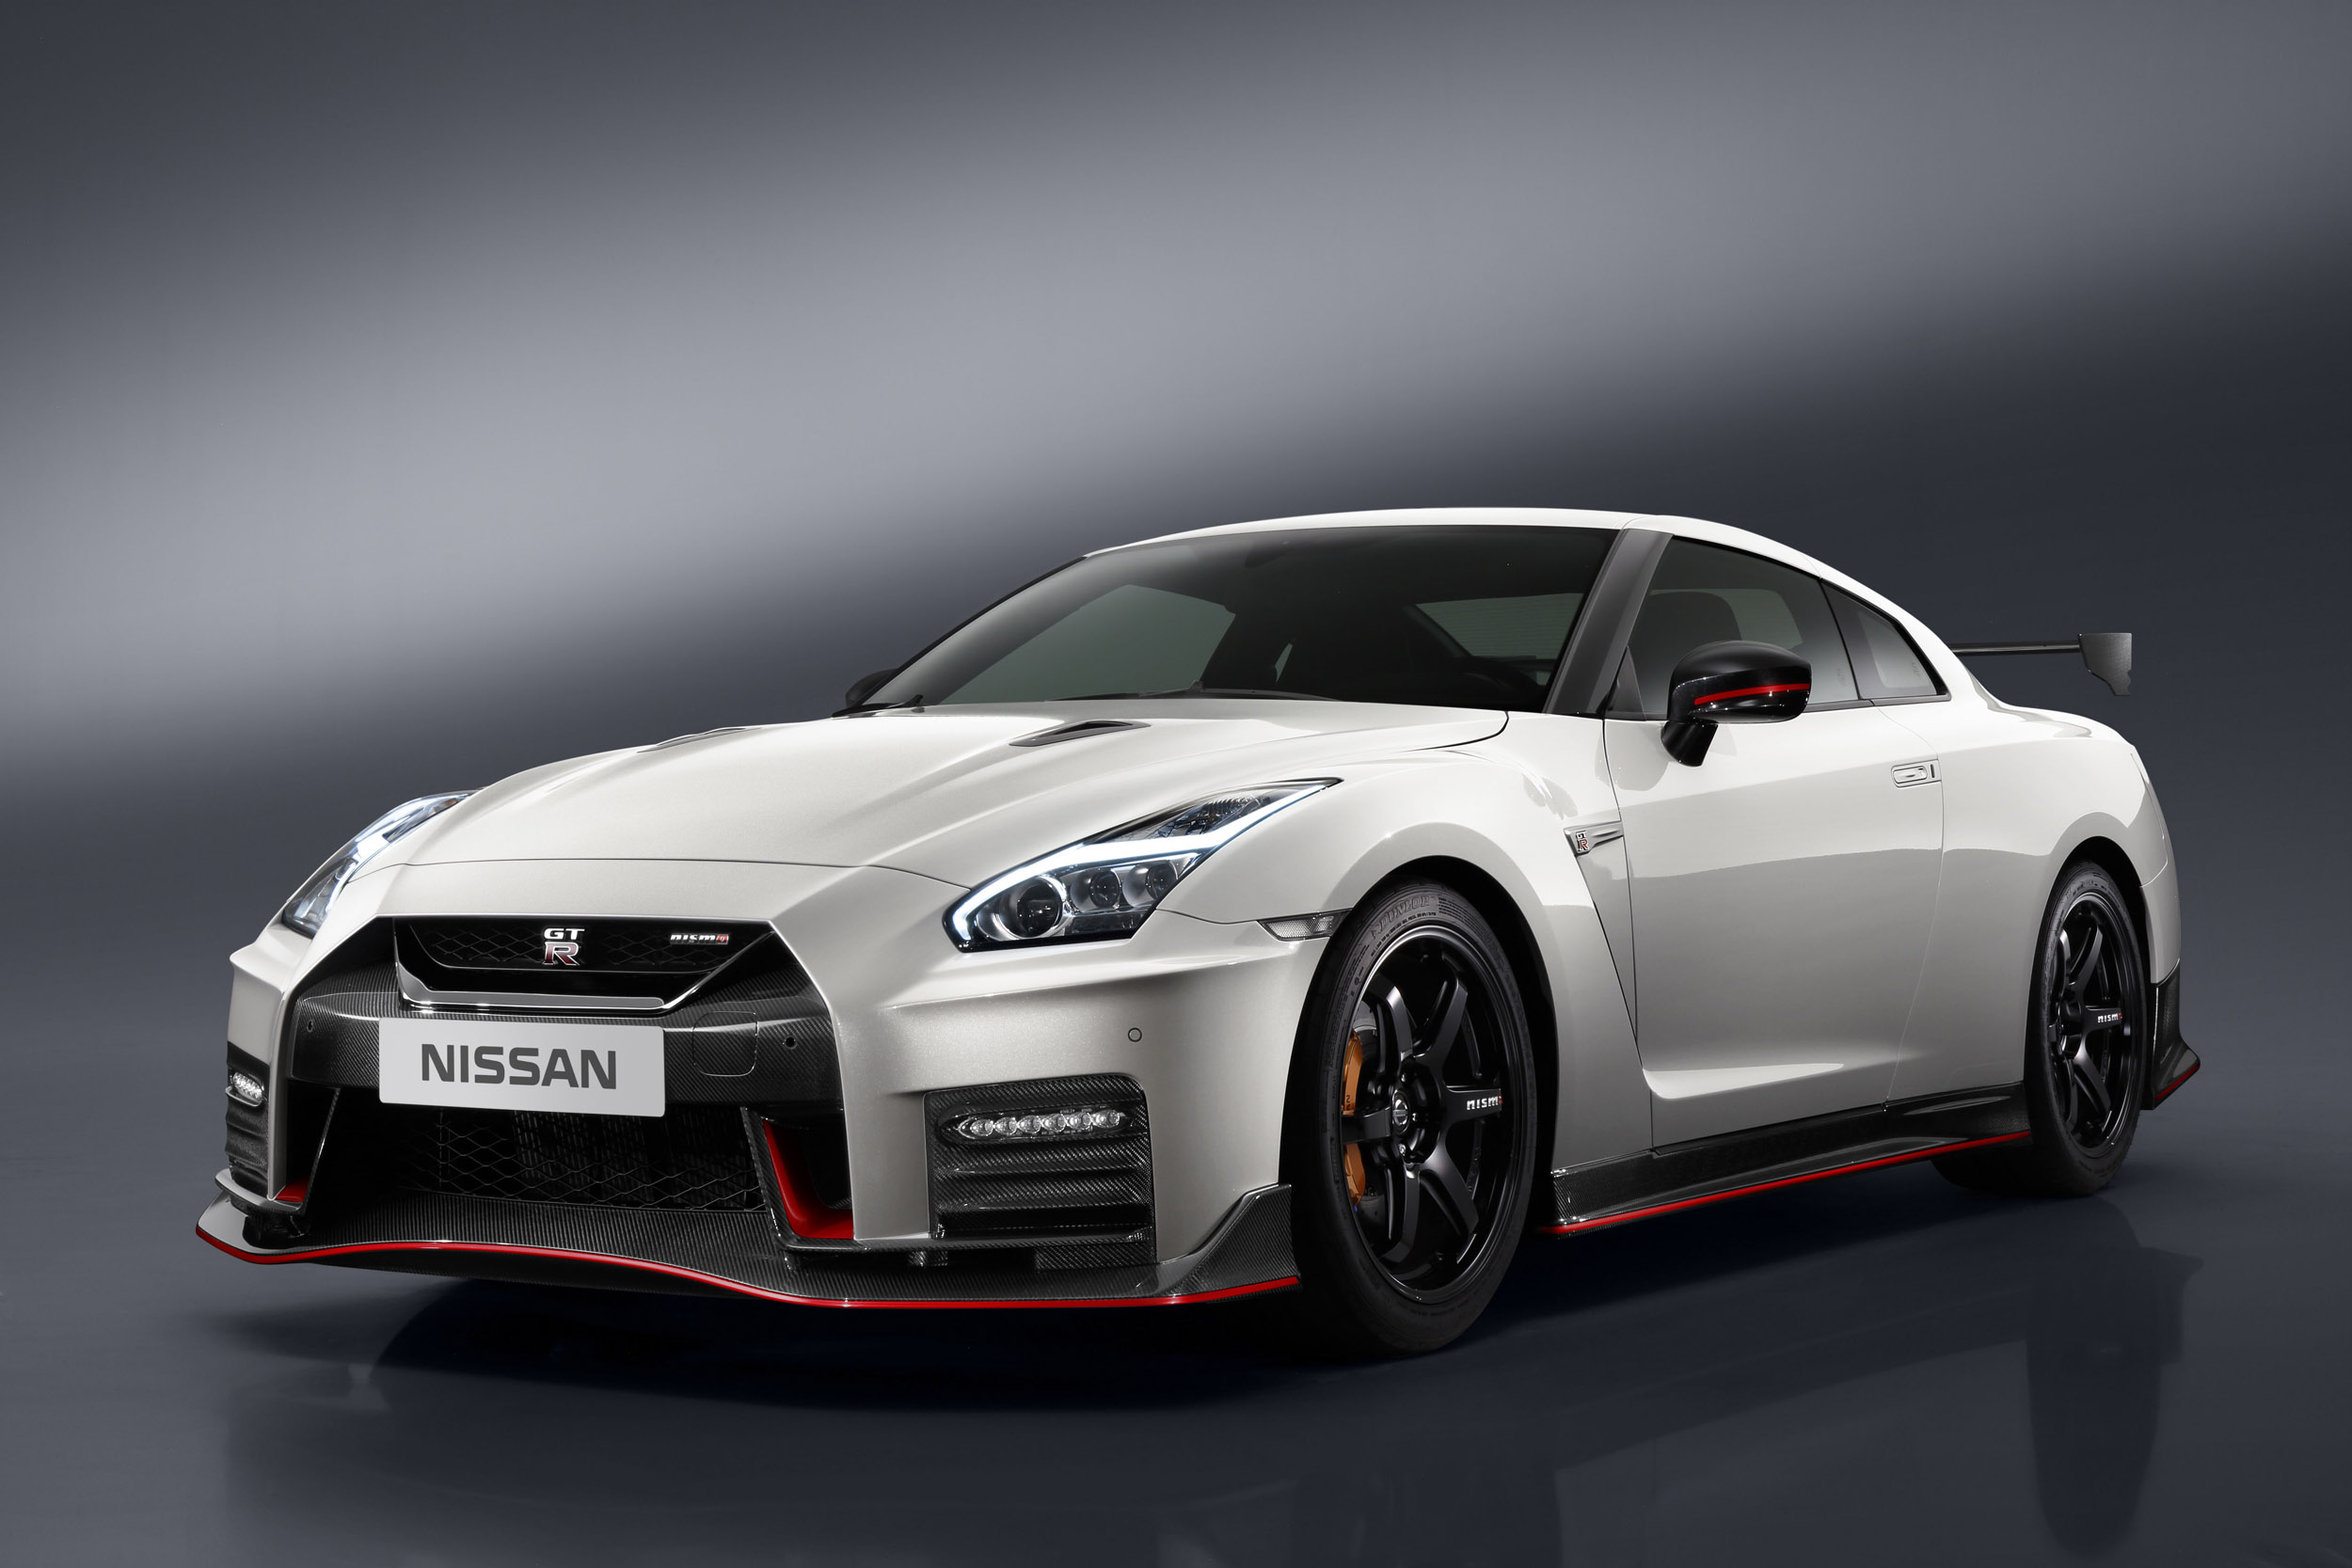 2017 Nissan GT-R Nismo pricing confirmed